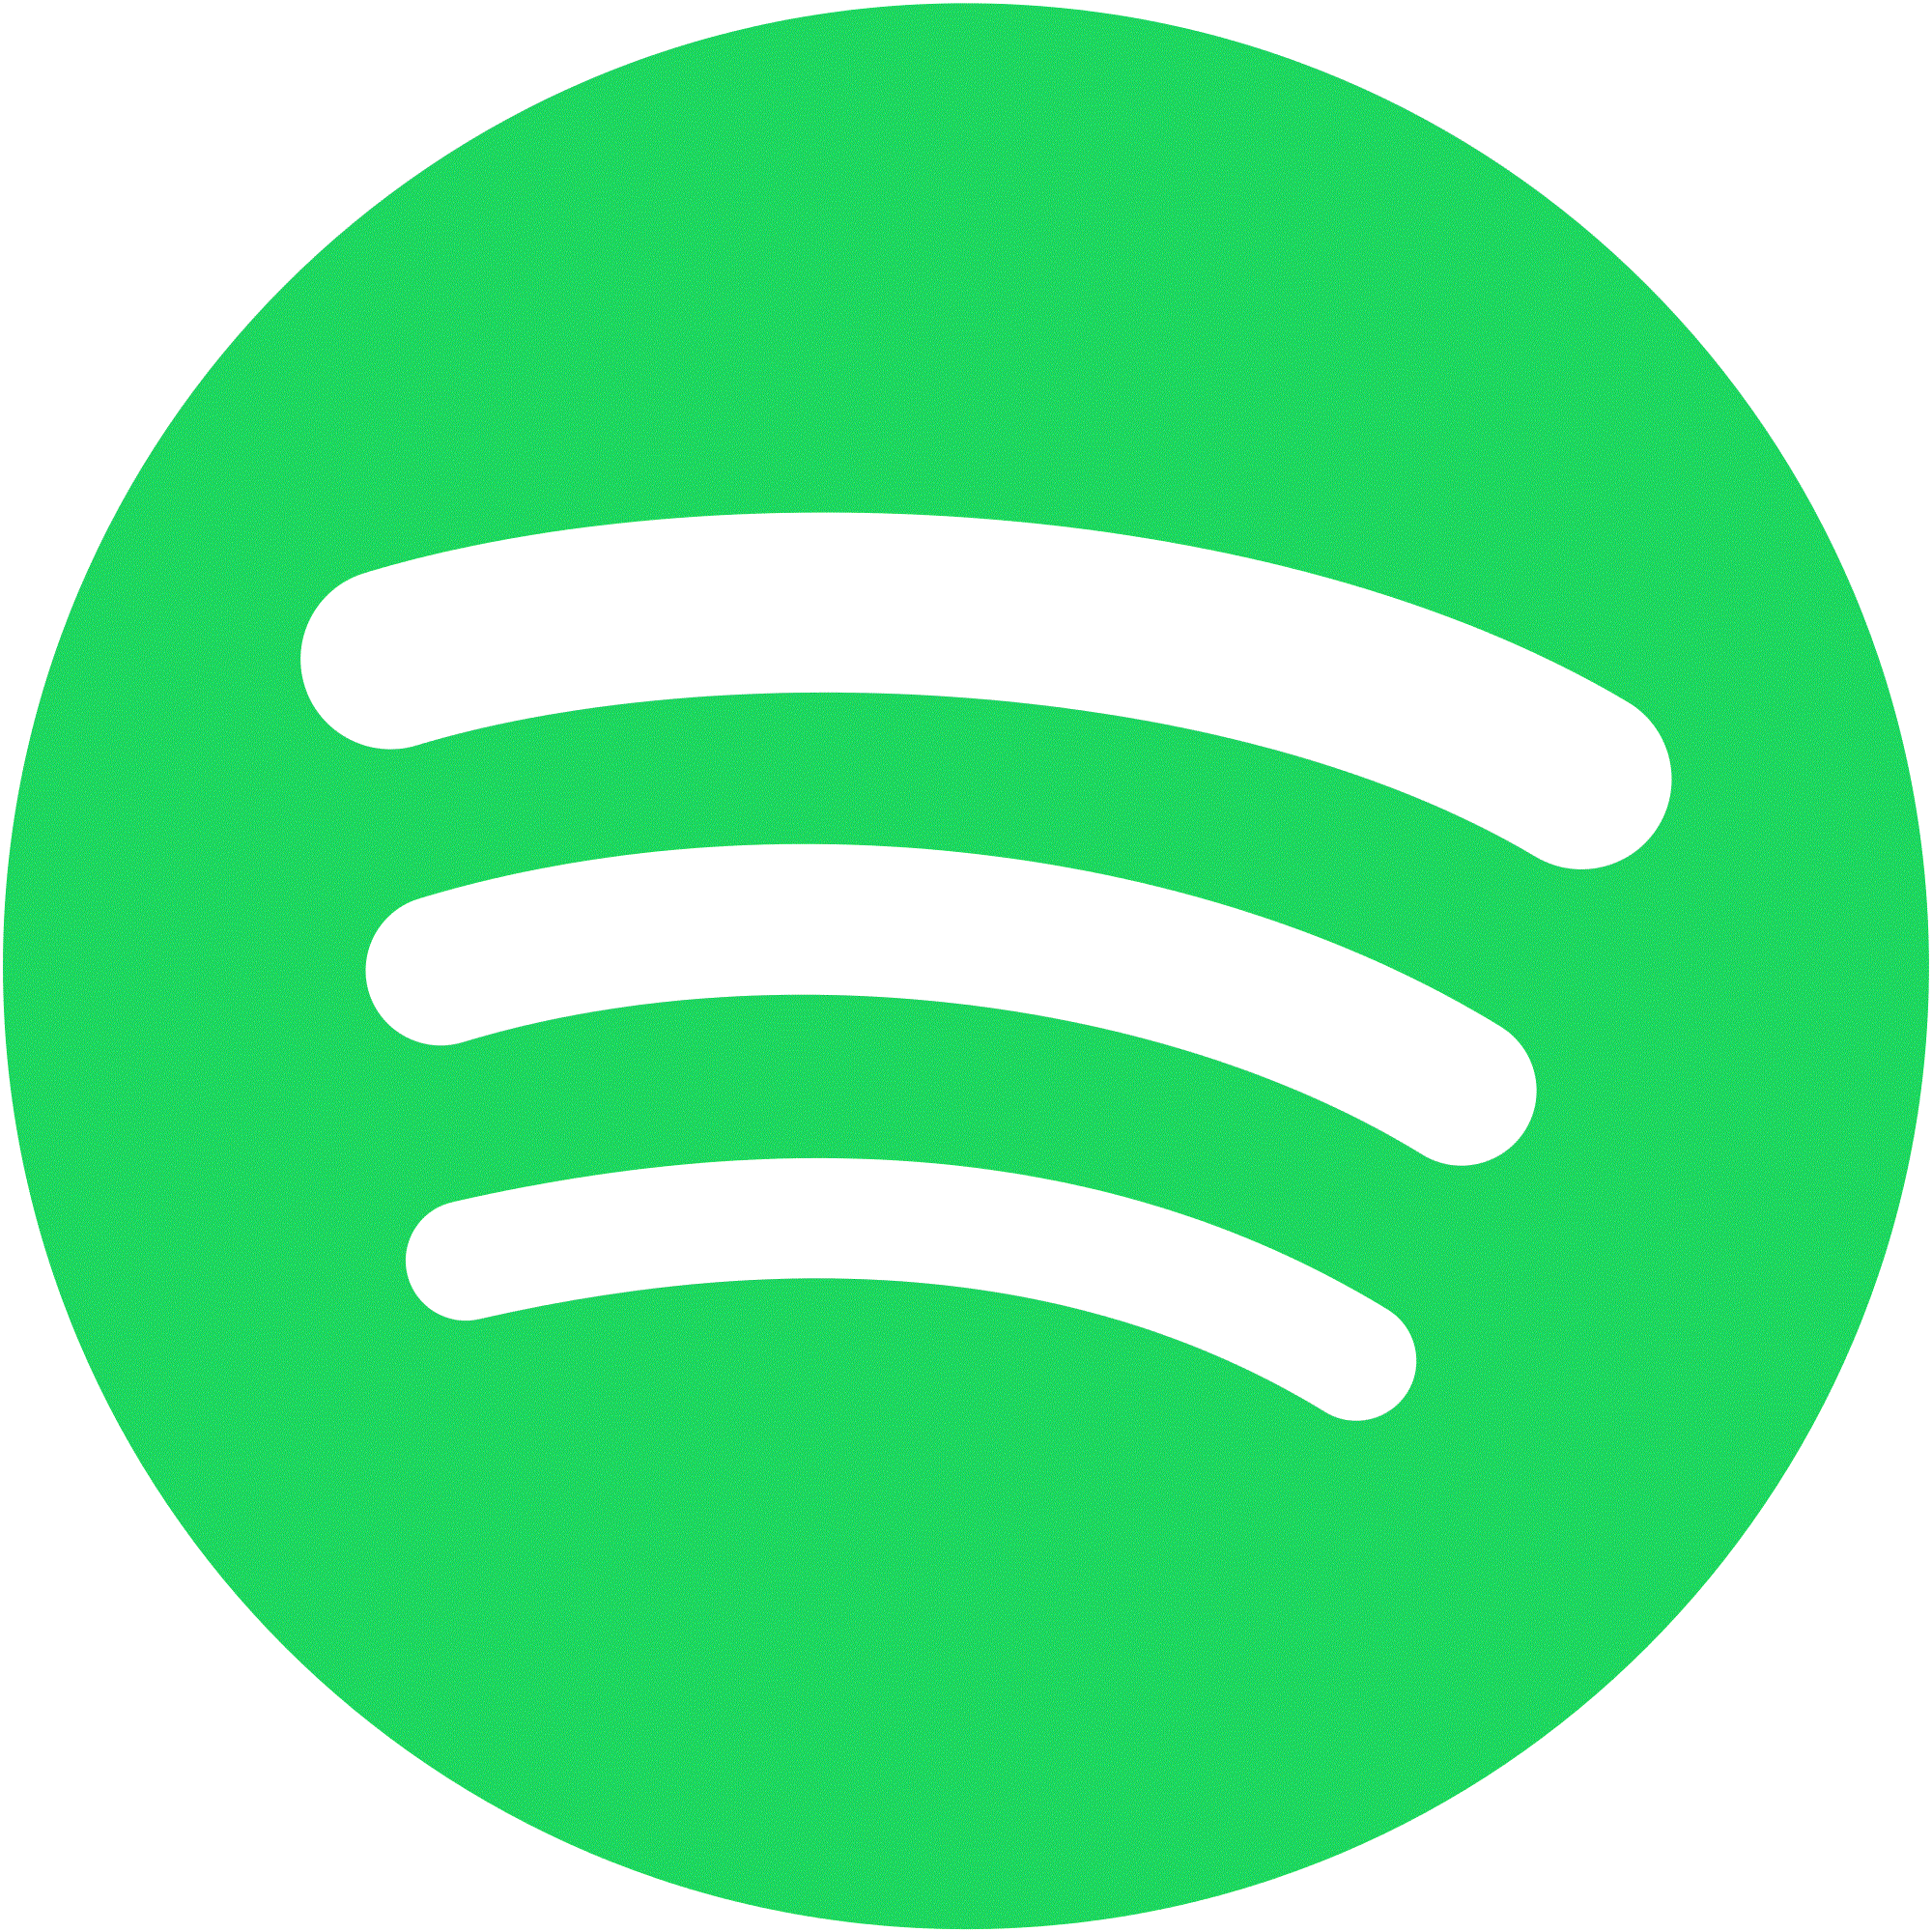 Spotify_Logo.gif Moonlyn, Moonlyn Photos, Moonlyn Pix, Angels Sing Peace, Let The Angels Sing, Angellic Music, Angel Song, Peace Song, Peace and Love, Angel of Peace, Angel Music, Angel Voice, Angel Aria, Soprano, Diva, Toronto